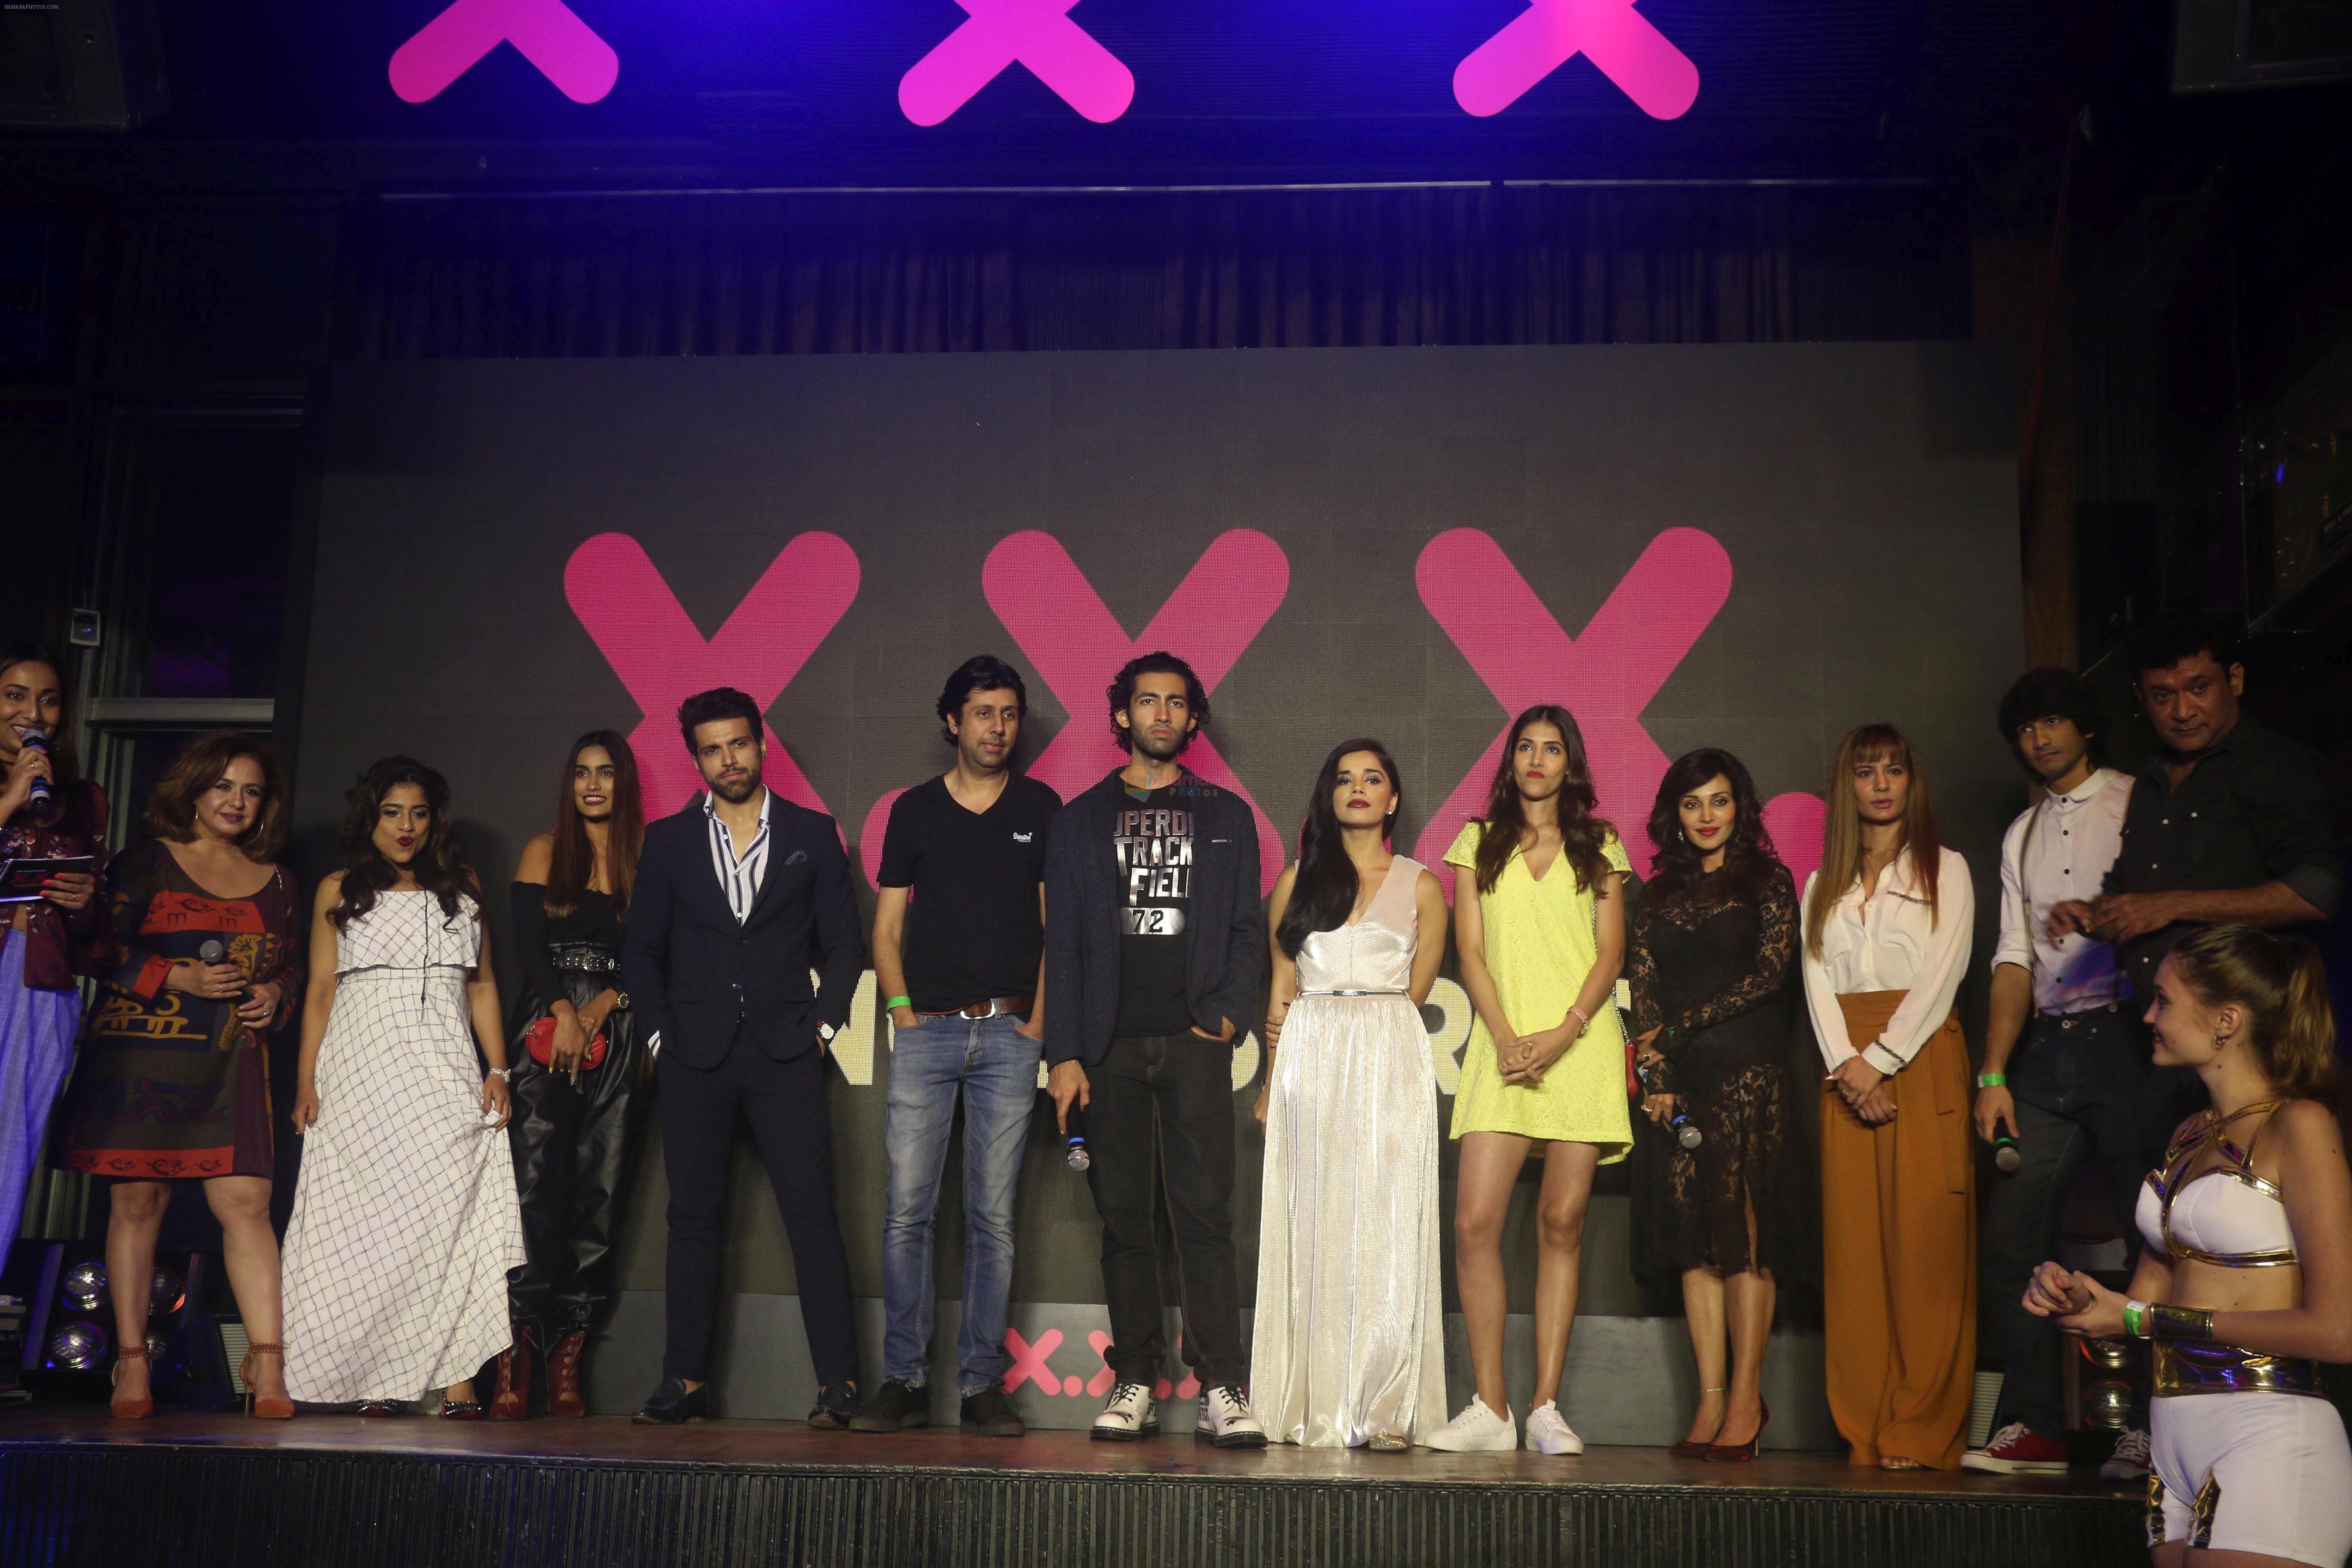 Rithvik Dhanjani at the Unveiling of Alt Balaji's new web series XXX in Hard Rock Cafe andheri on 19th Sept 2018